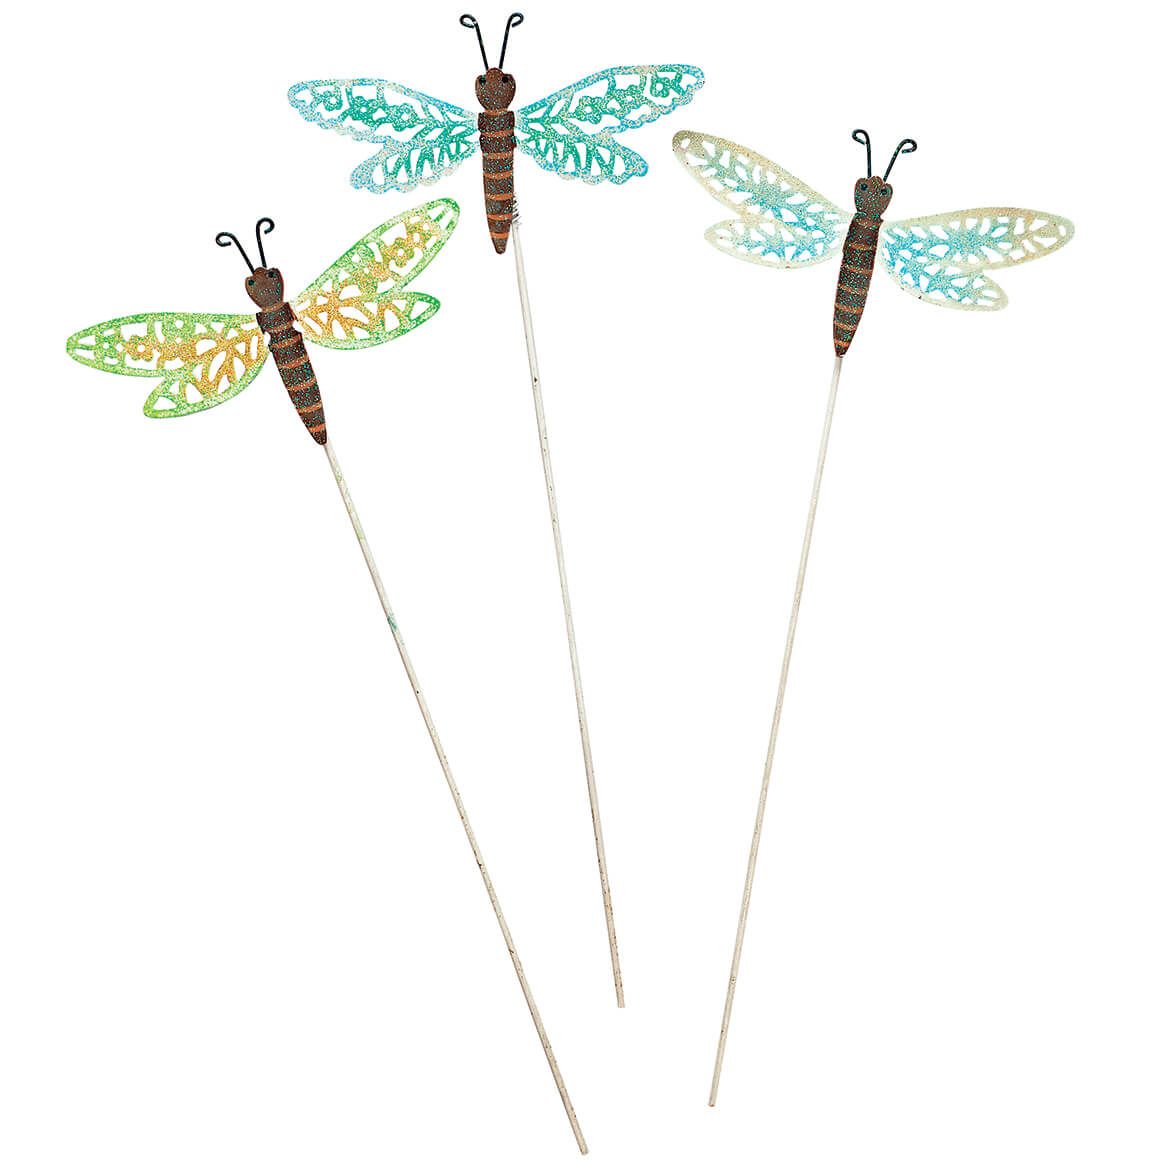 Metal Dragonfly Stakes by Fox River™ Creations, Set of 3 + '-' + 372750